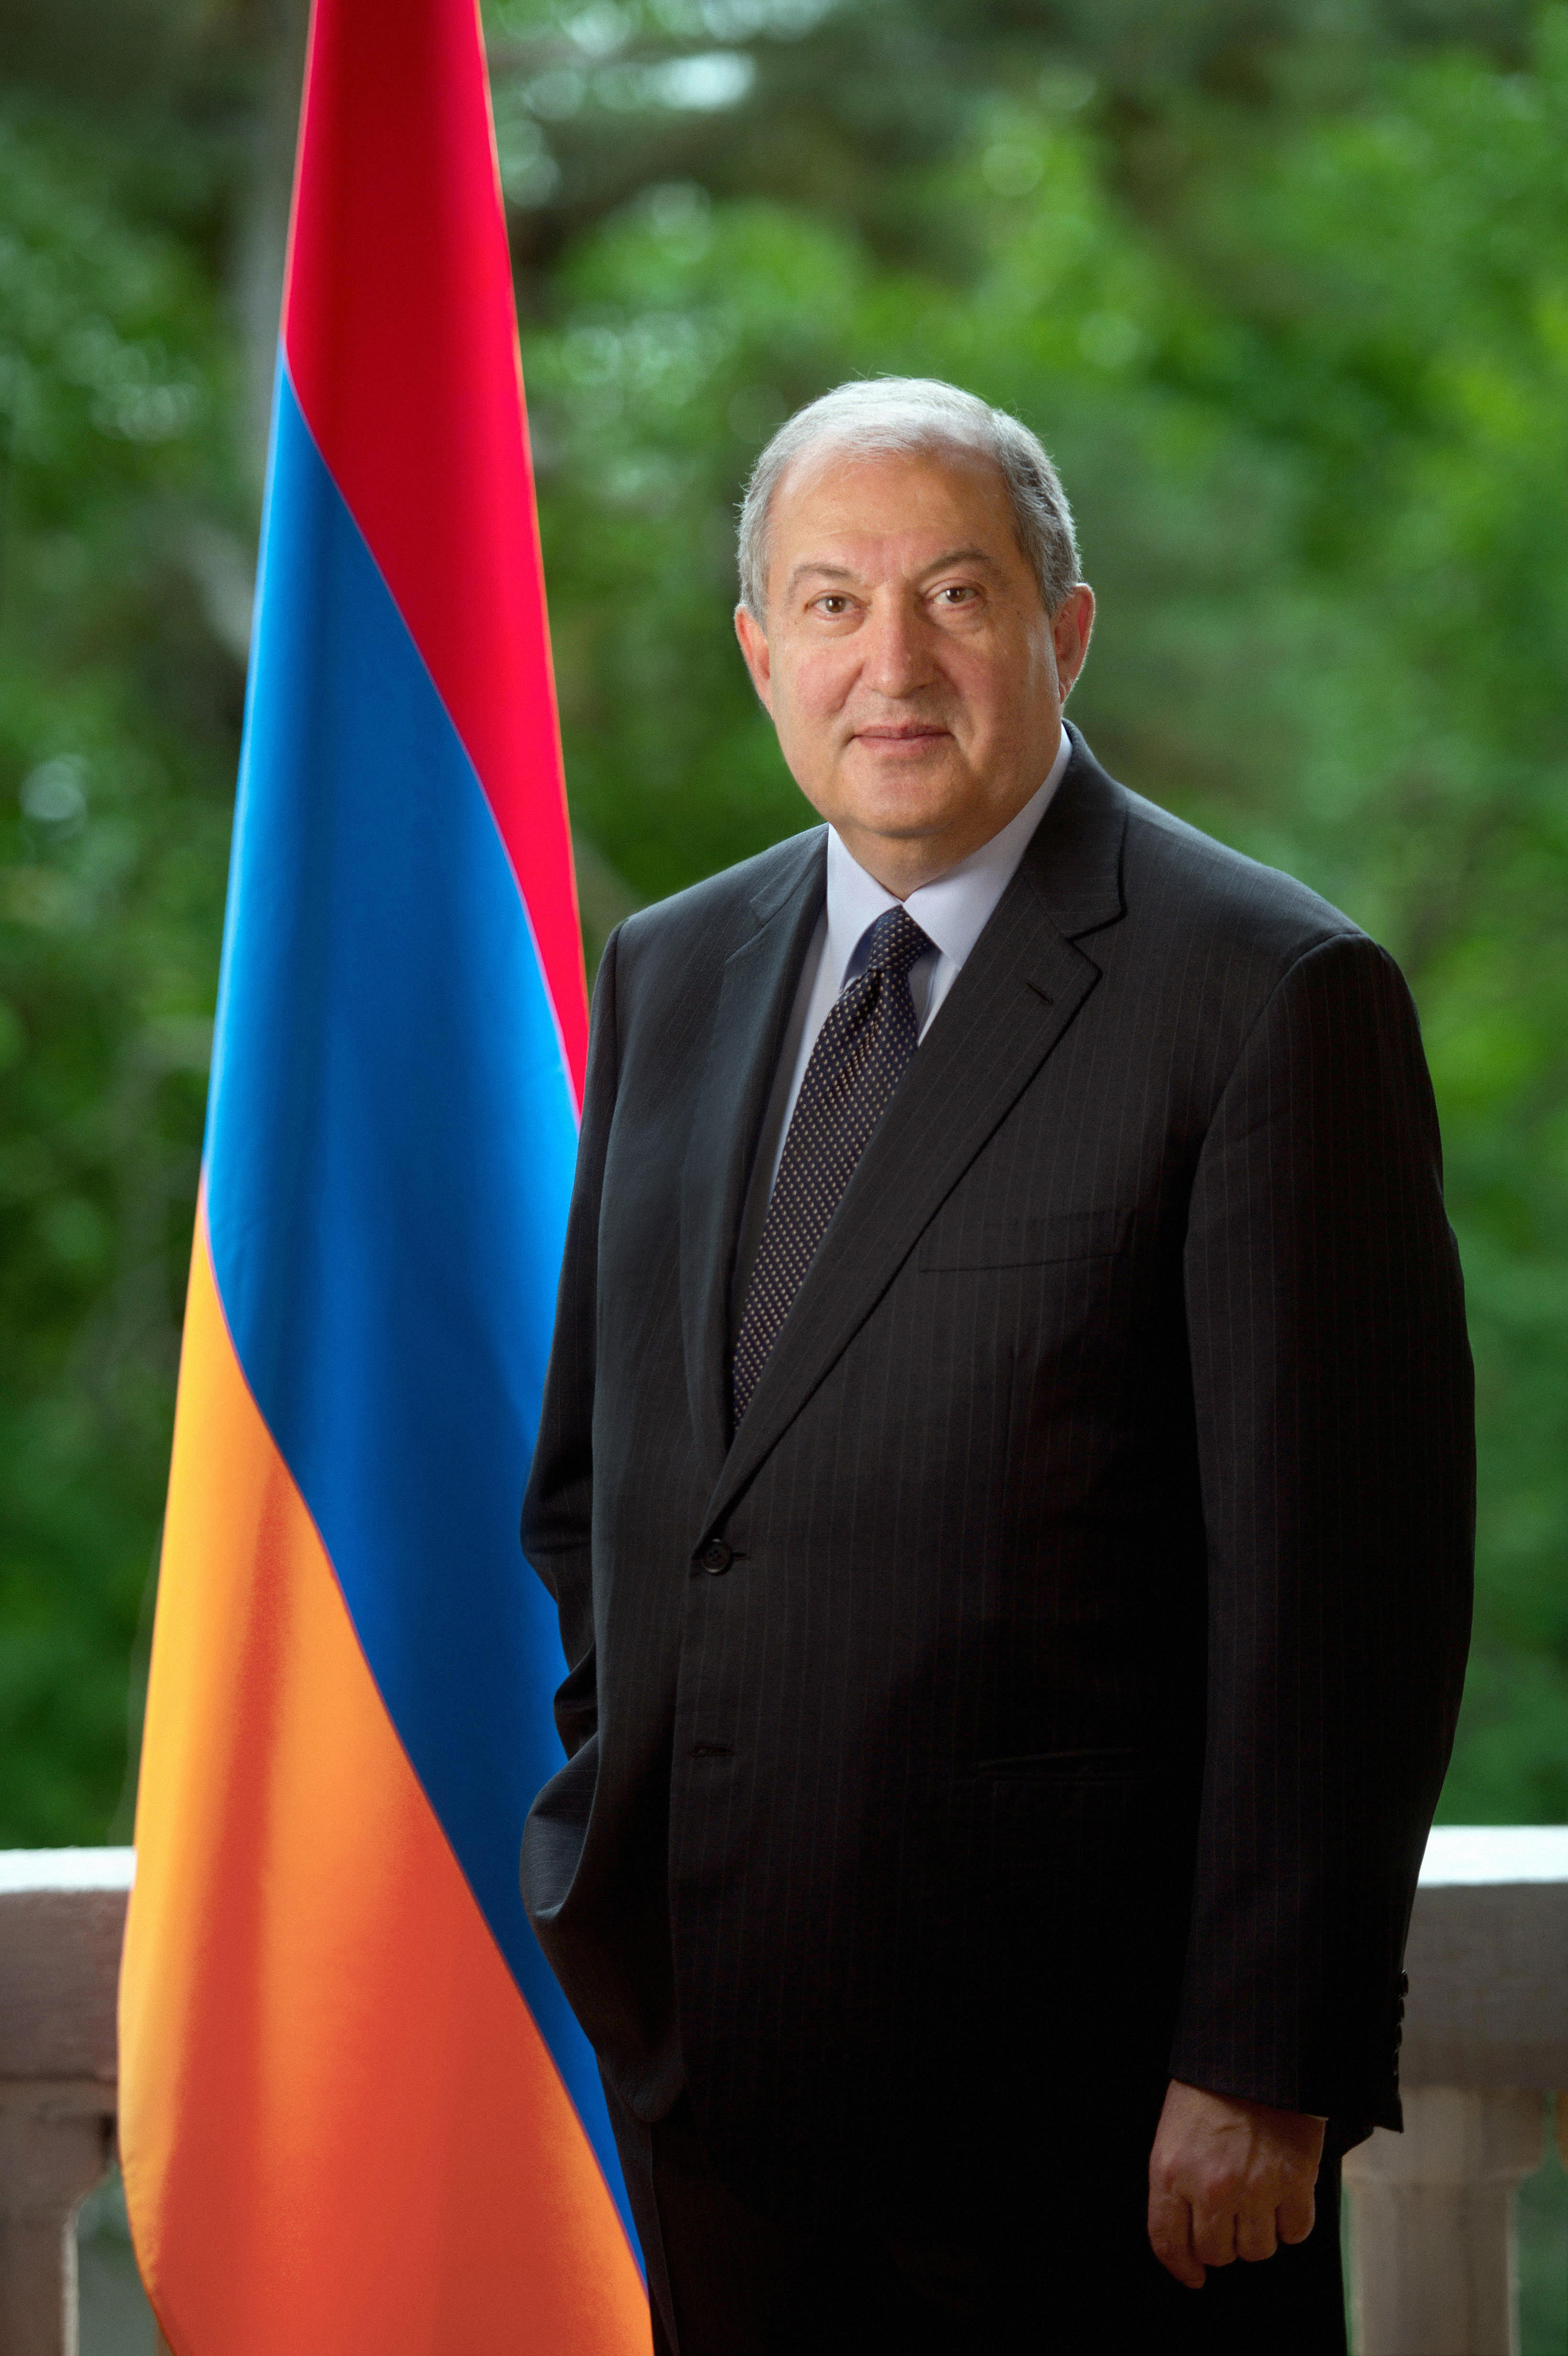 President Sarkissian sent a congratulatory message on the occasion of Artsakh Independence Day